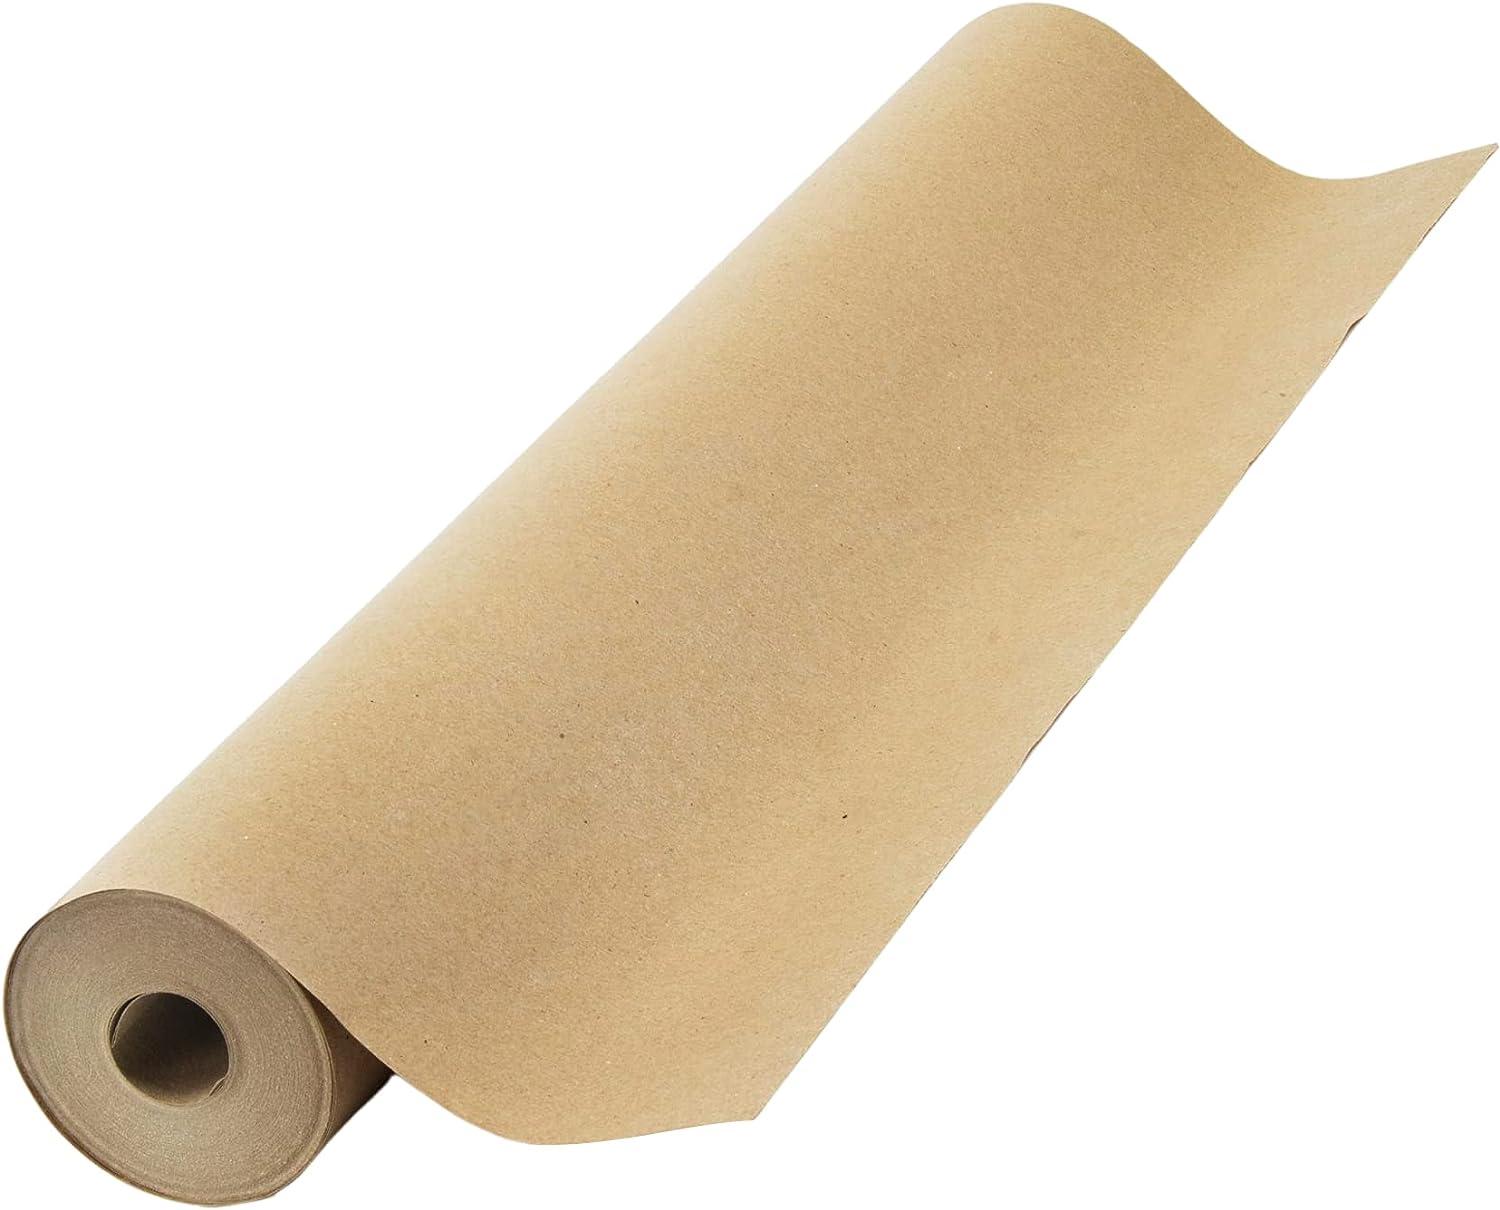 GRASARY Wrapping Paper Roll Waterproof Oil-Proof Kraft Paper Roll 11.8 x  1181 Heavy Duty Wrapping Paper for Moving, Art Craft, Shipping, Floor